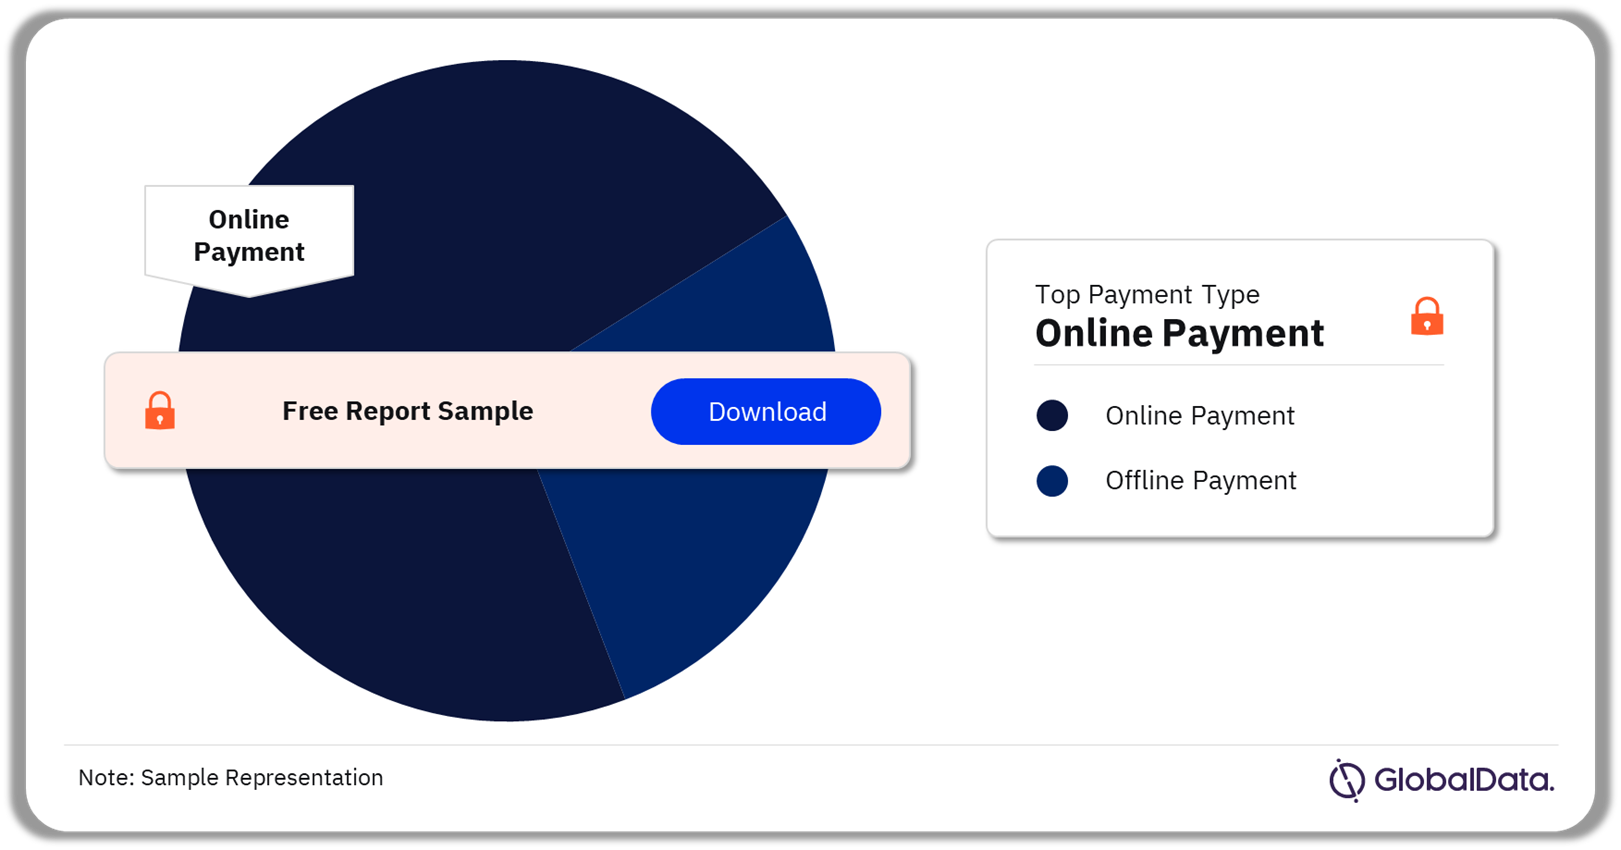 B2C Ecommerce Market Share by Payment Type, 2023 (%)